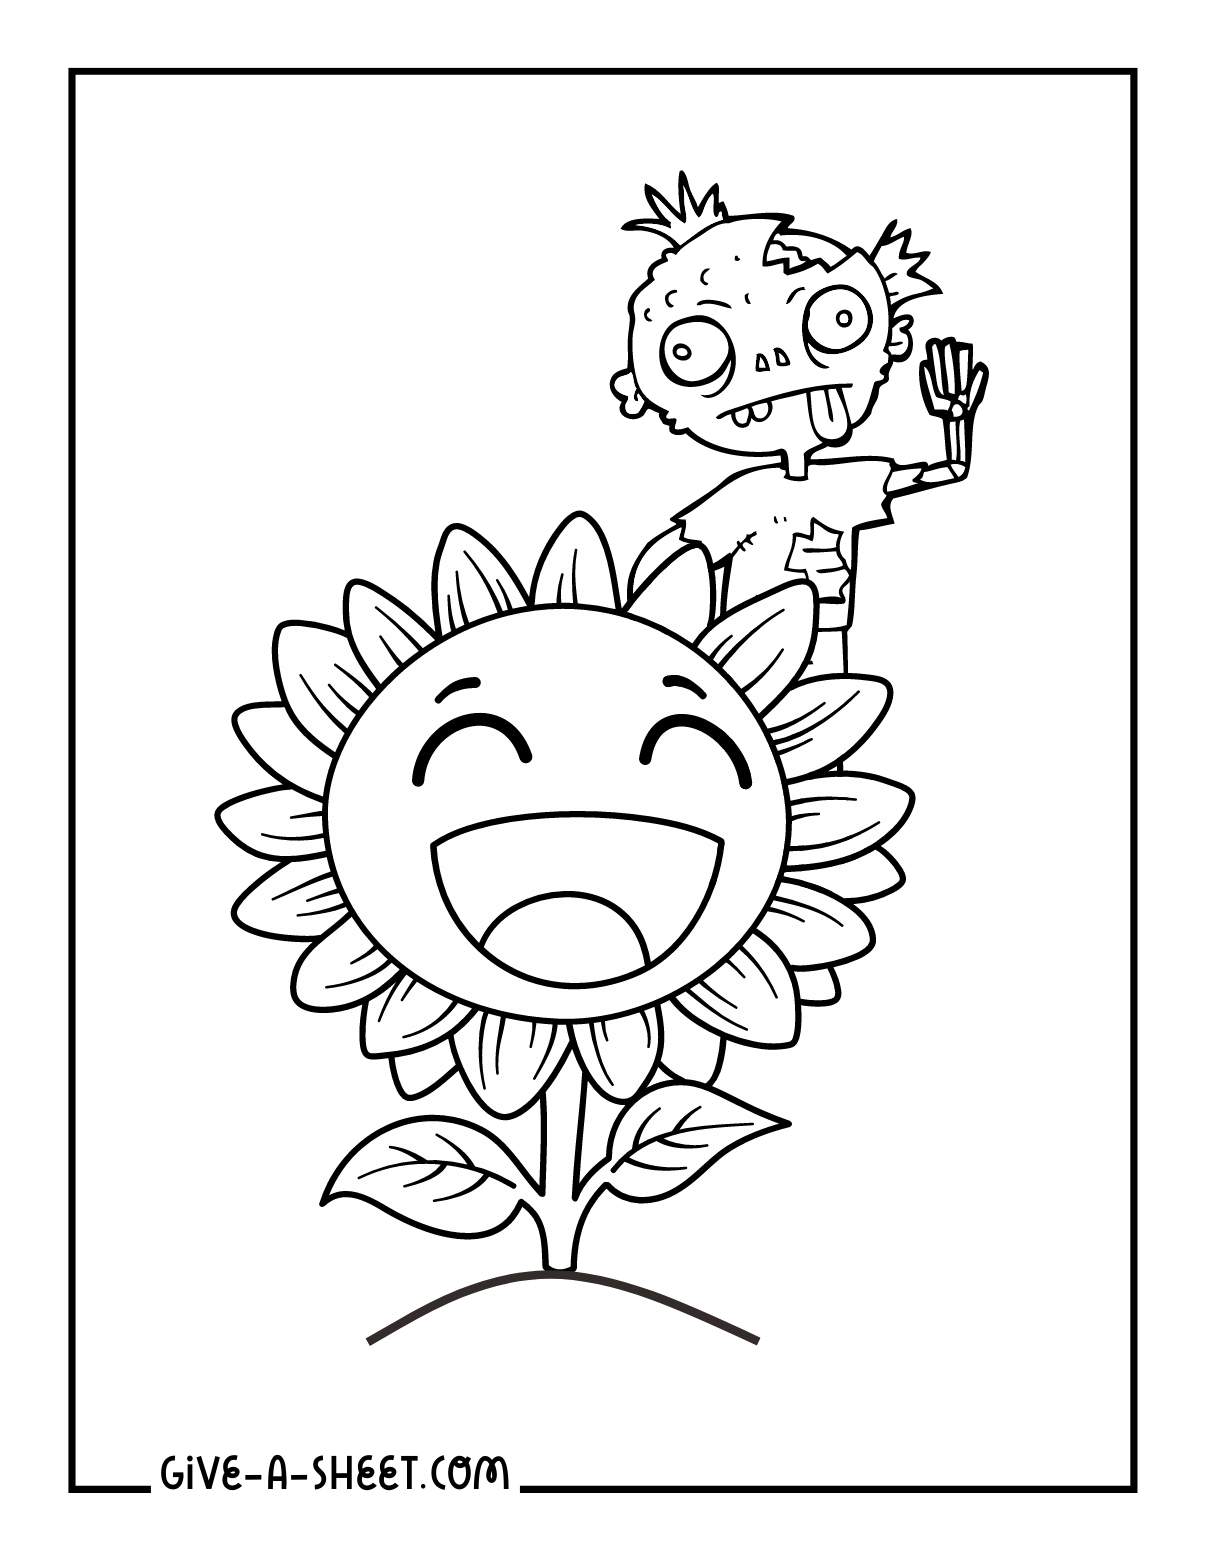 Plants vs zombie coloring page for adults.